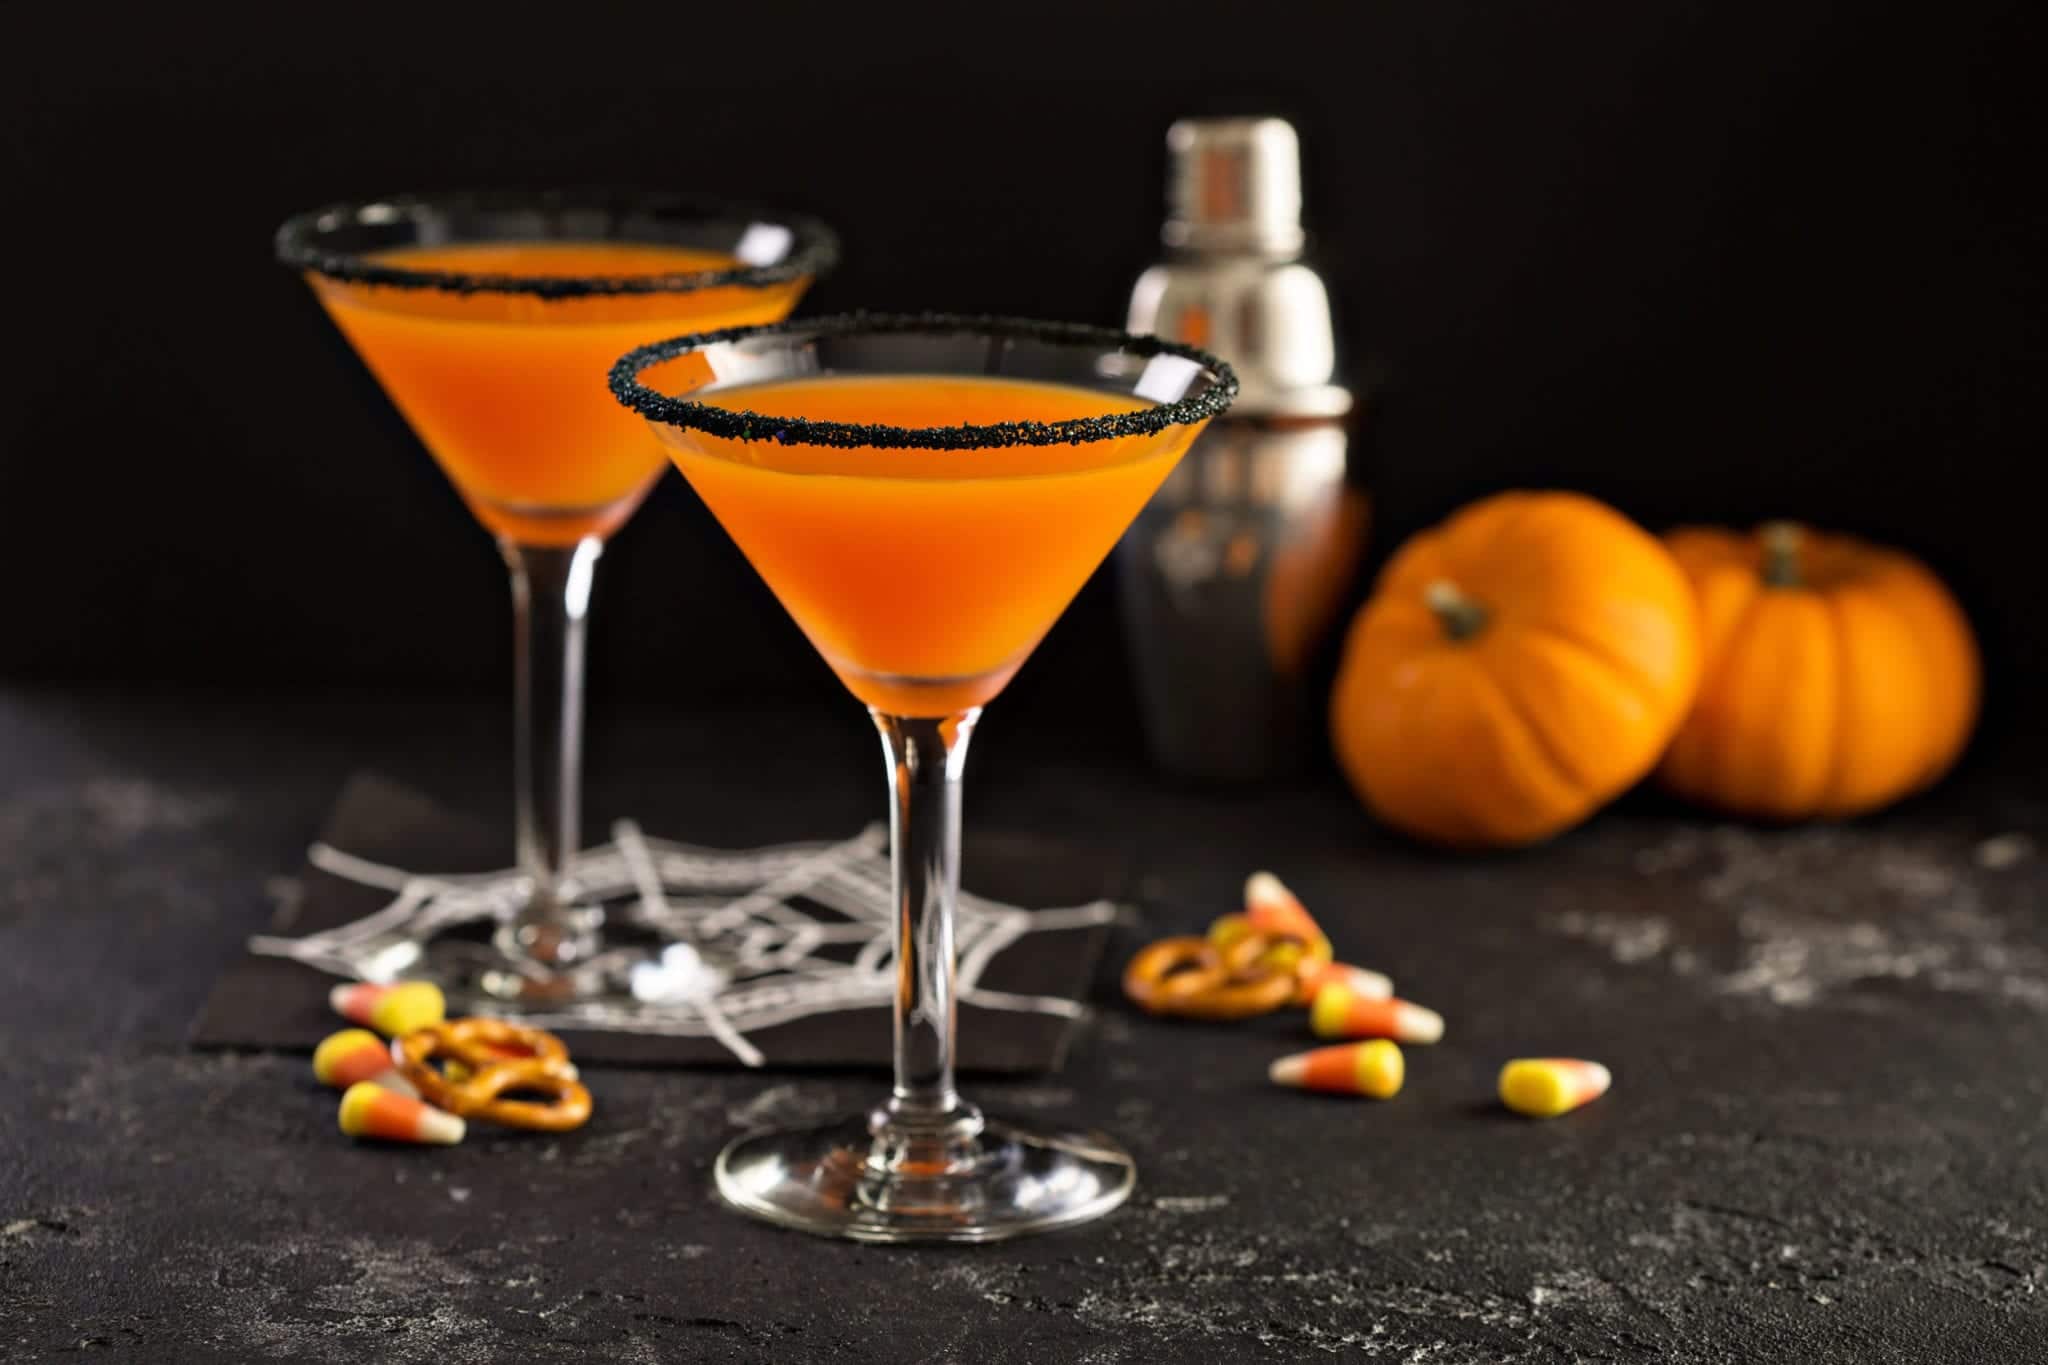 , Forget Candy – Halloween Drinking Can Hurt Your Oral  Health, Too